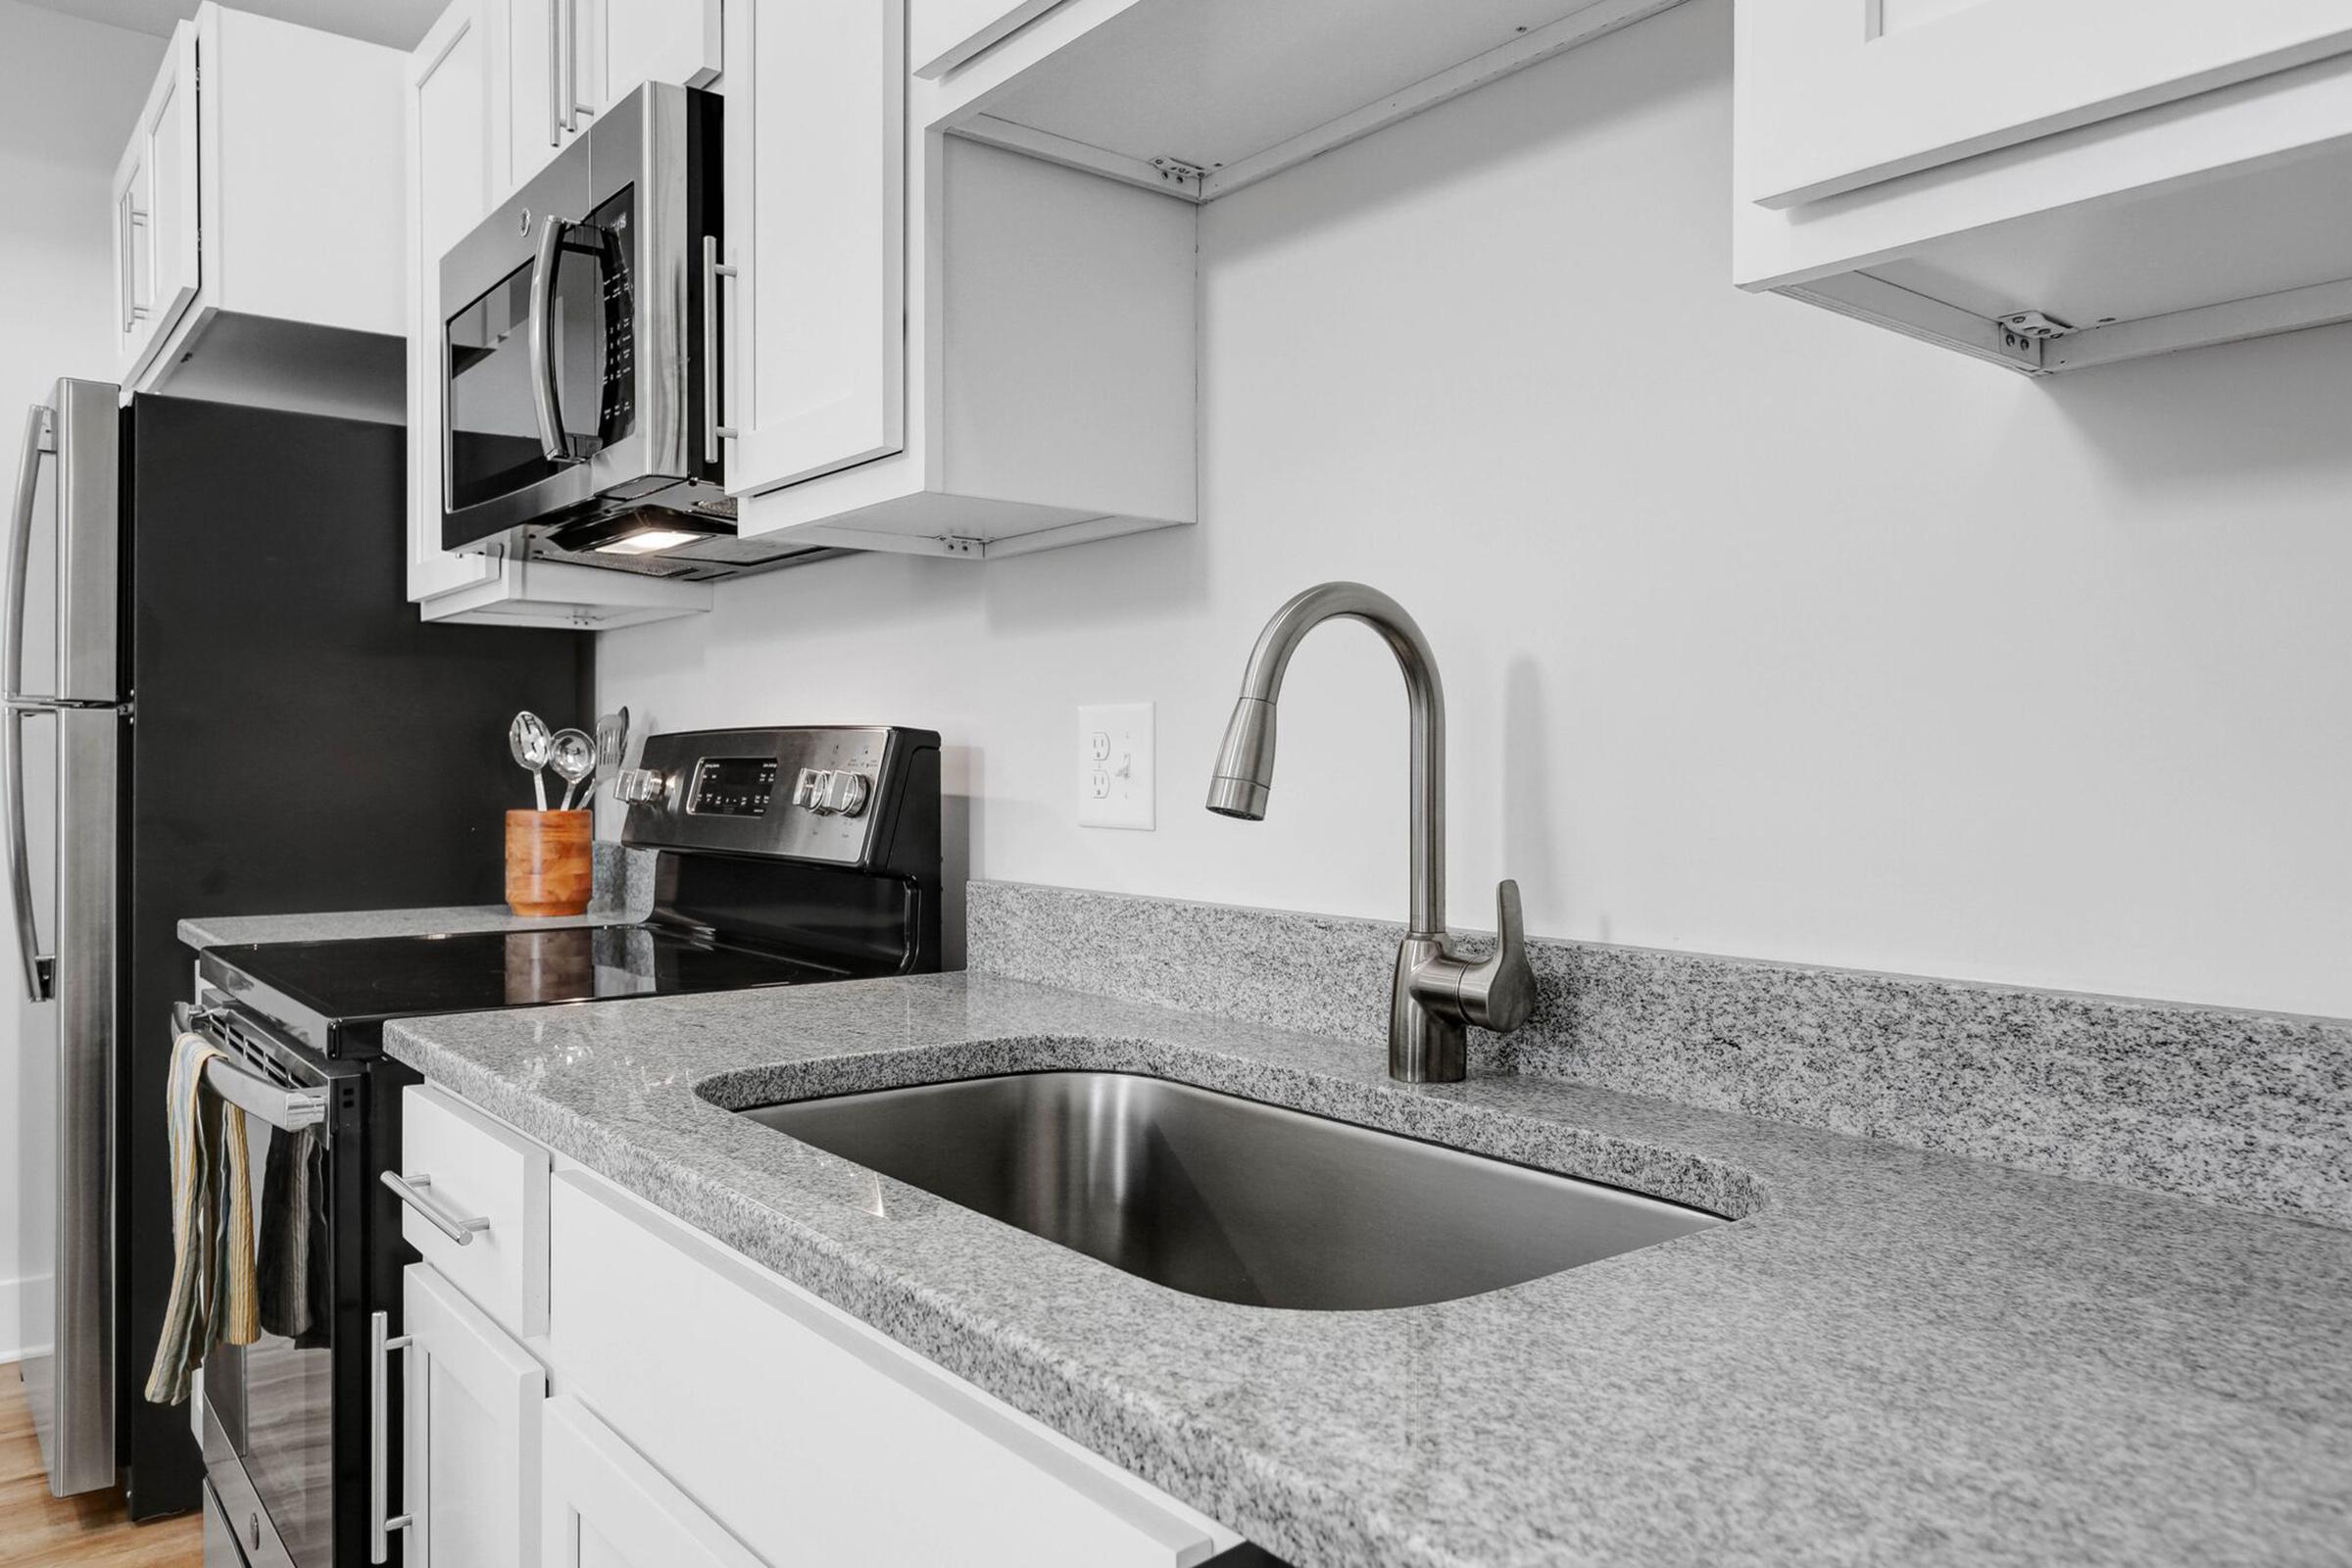 Stainless steel appliances at The Townhomes at Beau Rivage in Wilmington, North Carolina.